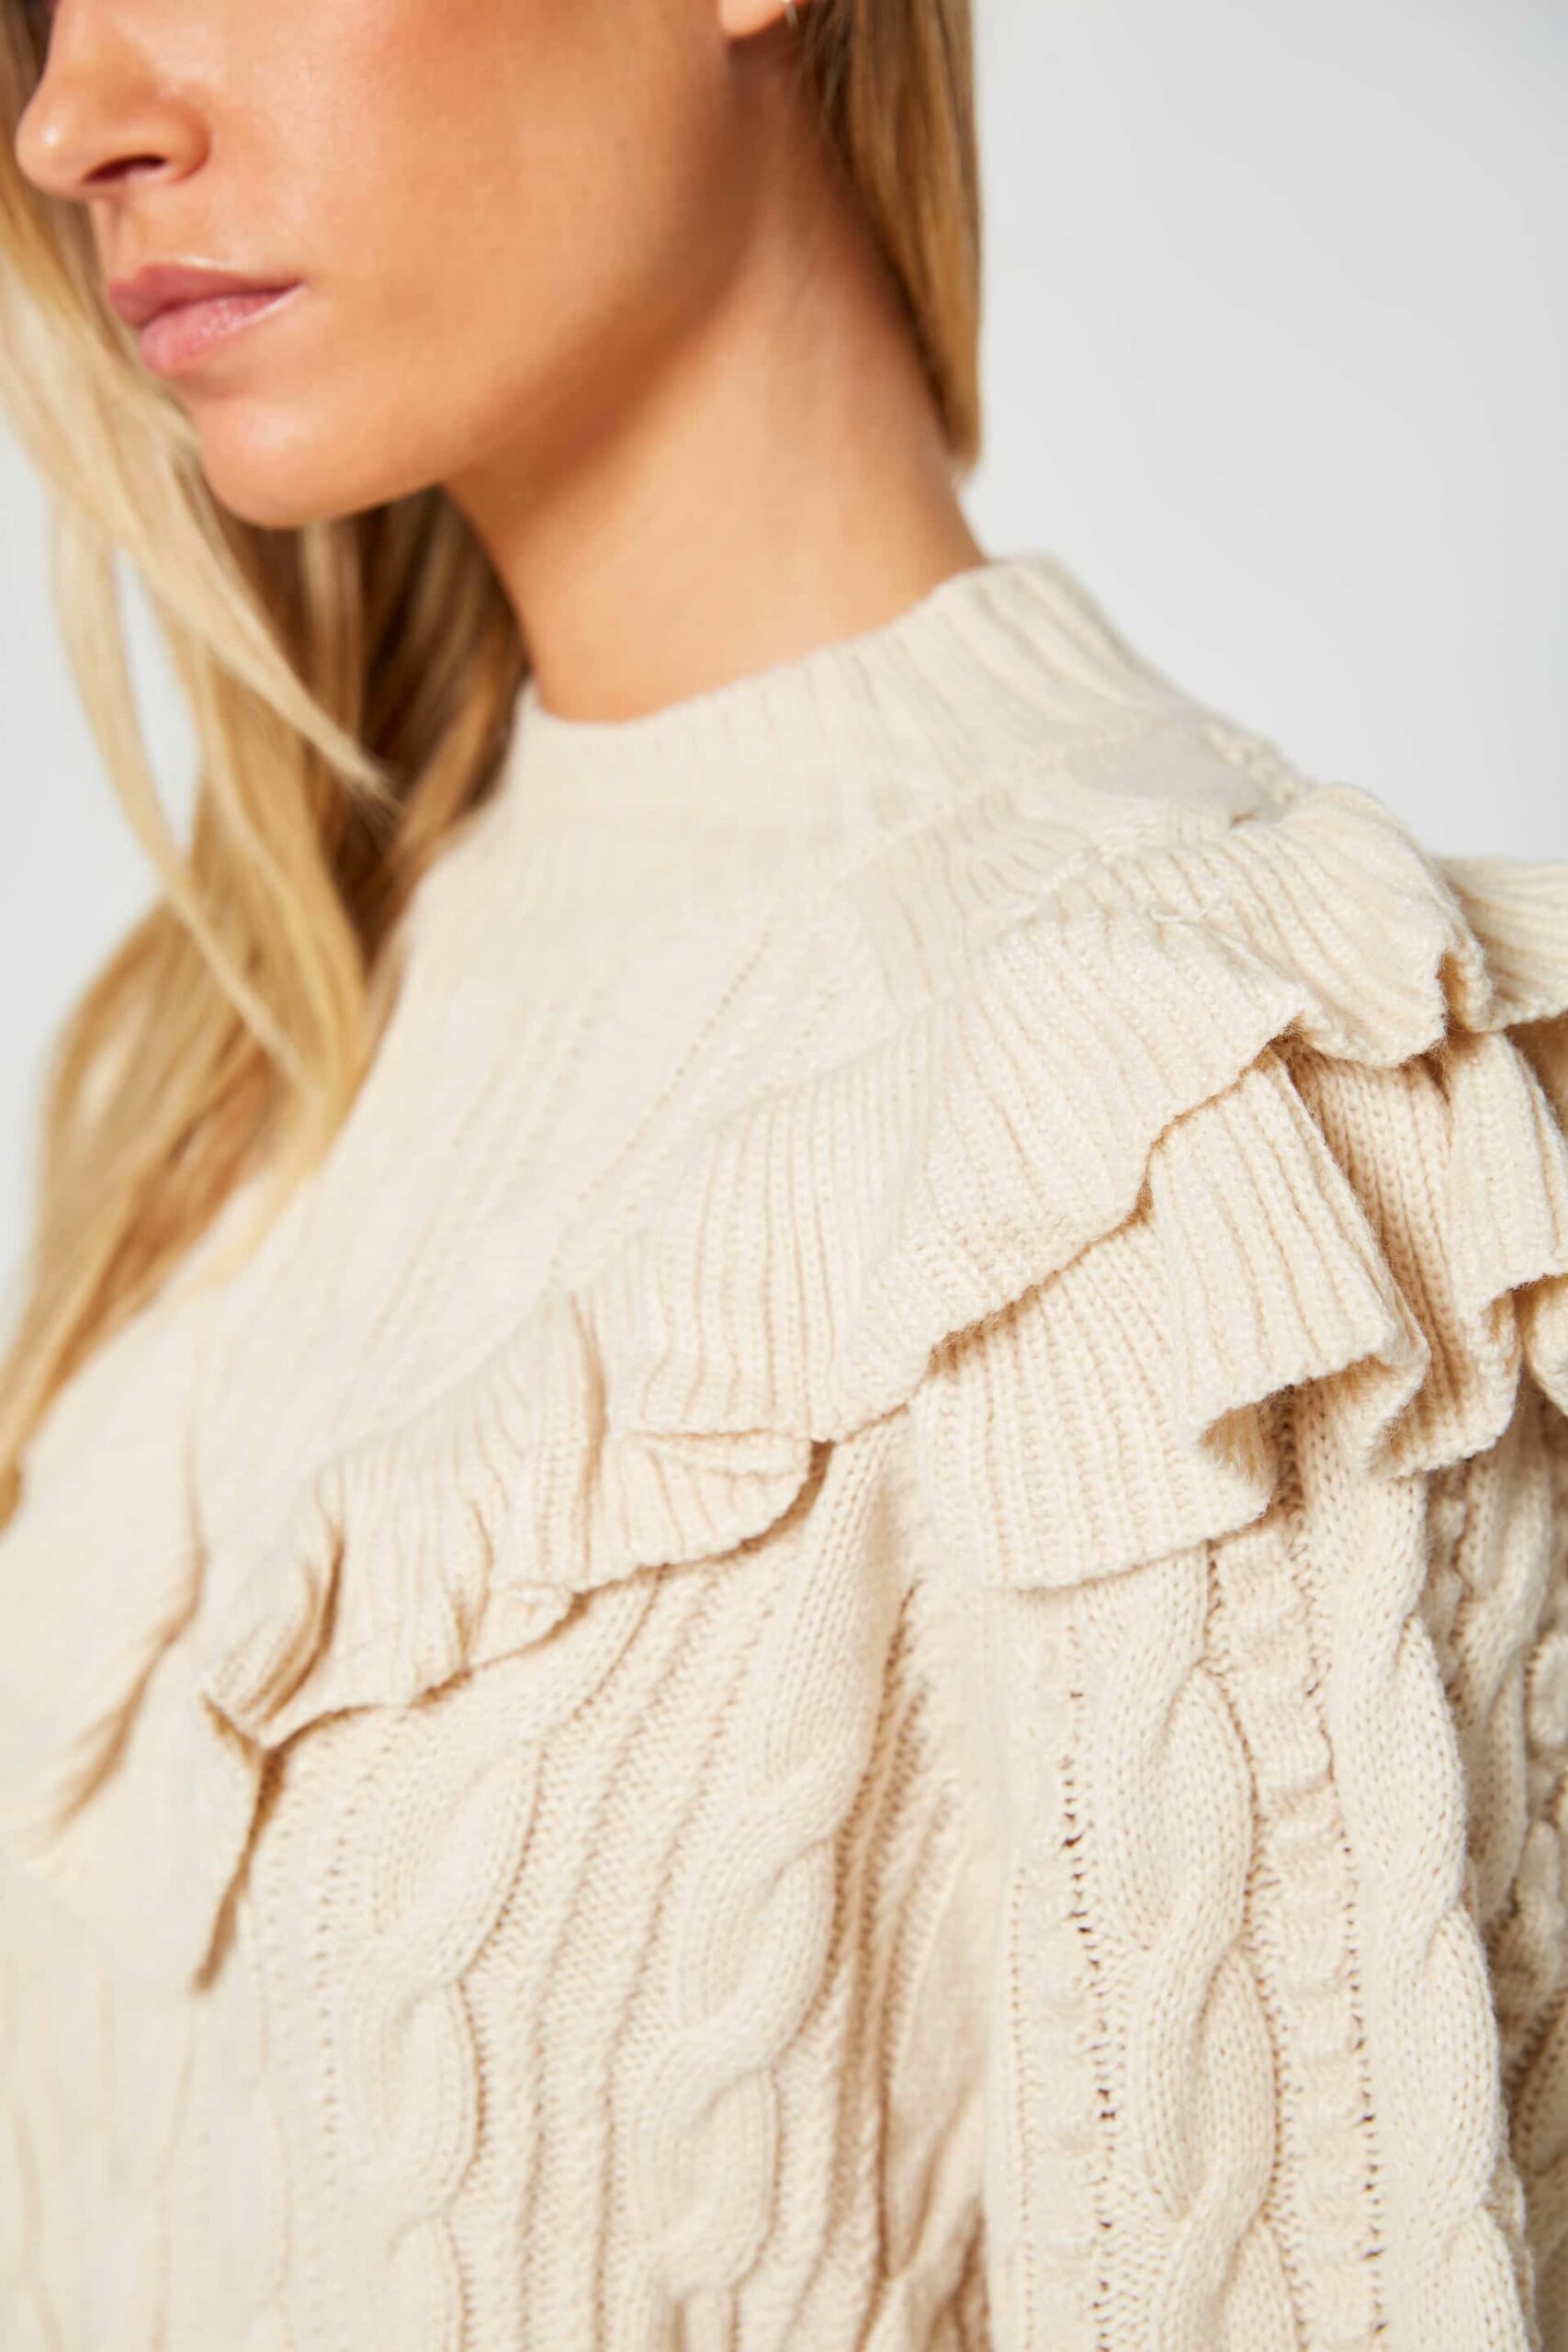 Braided sweater with ruffles